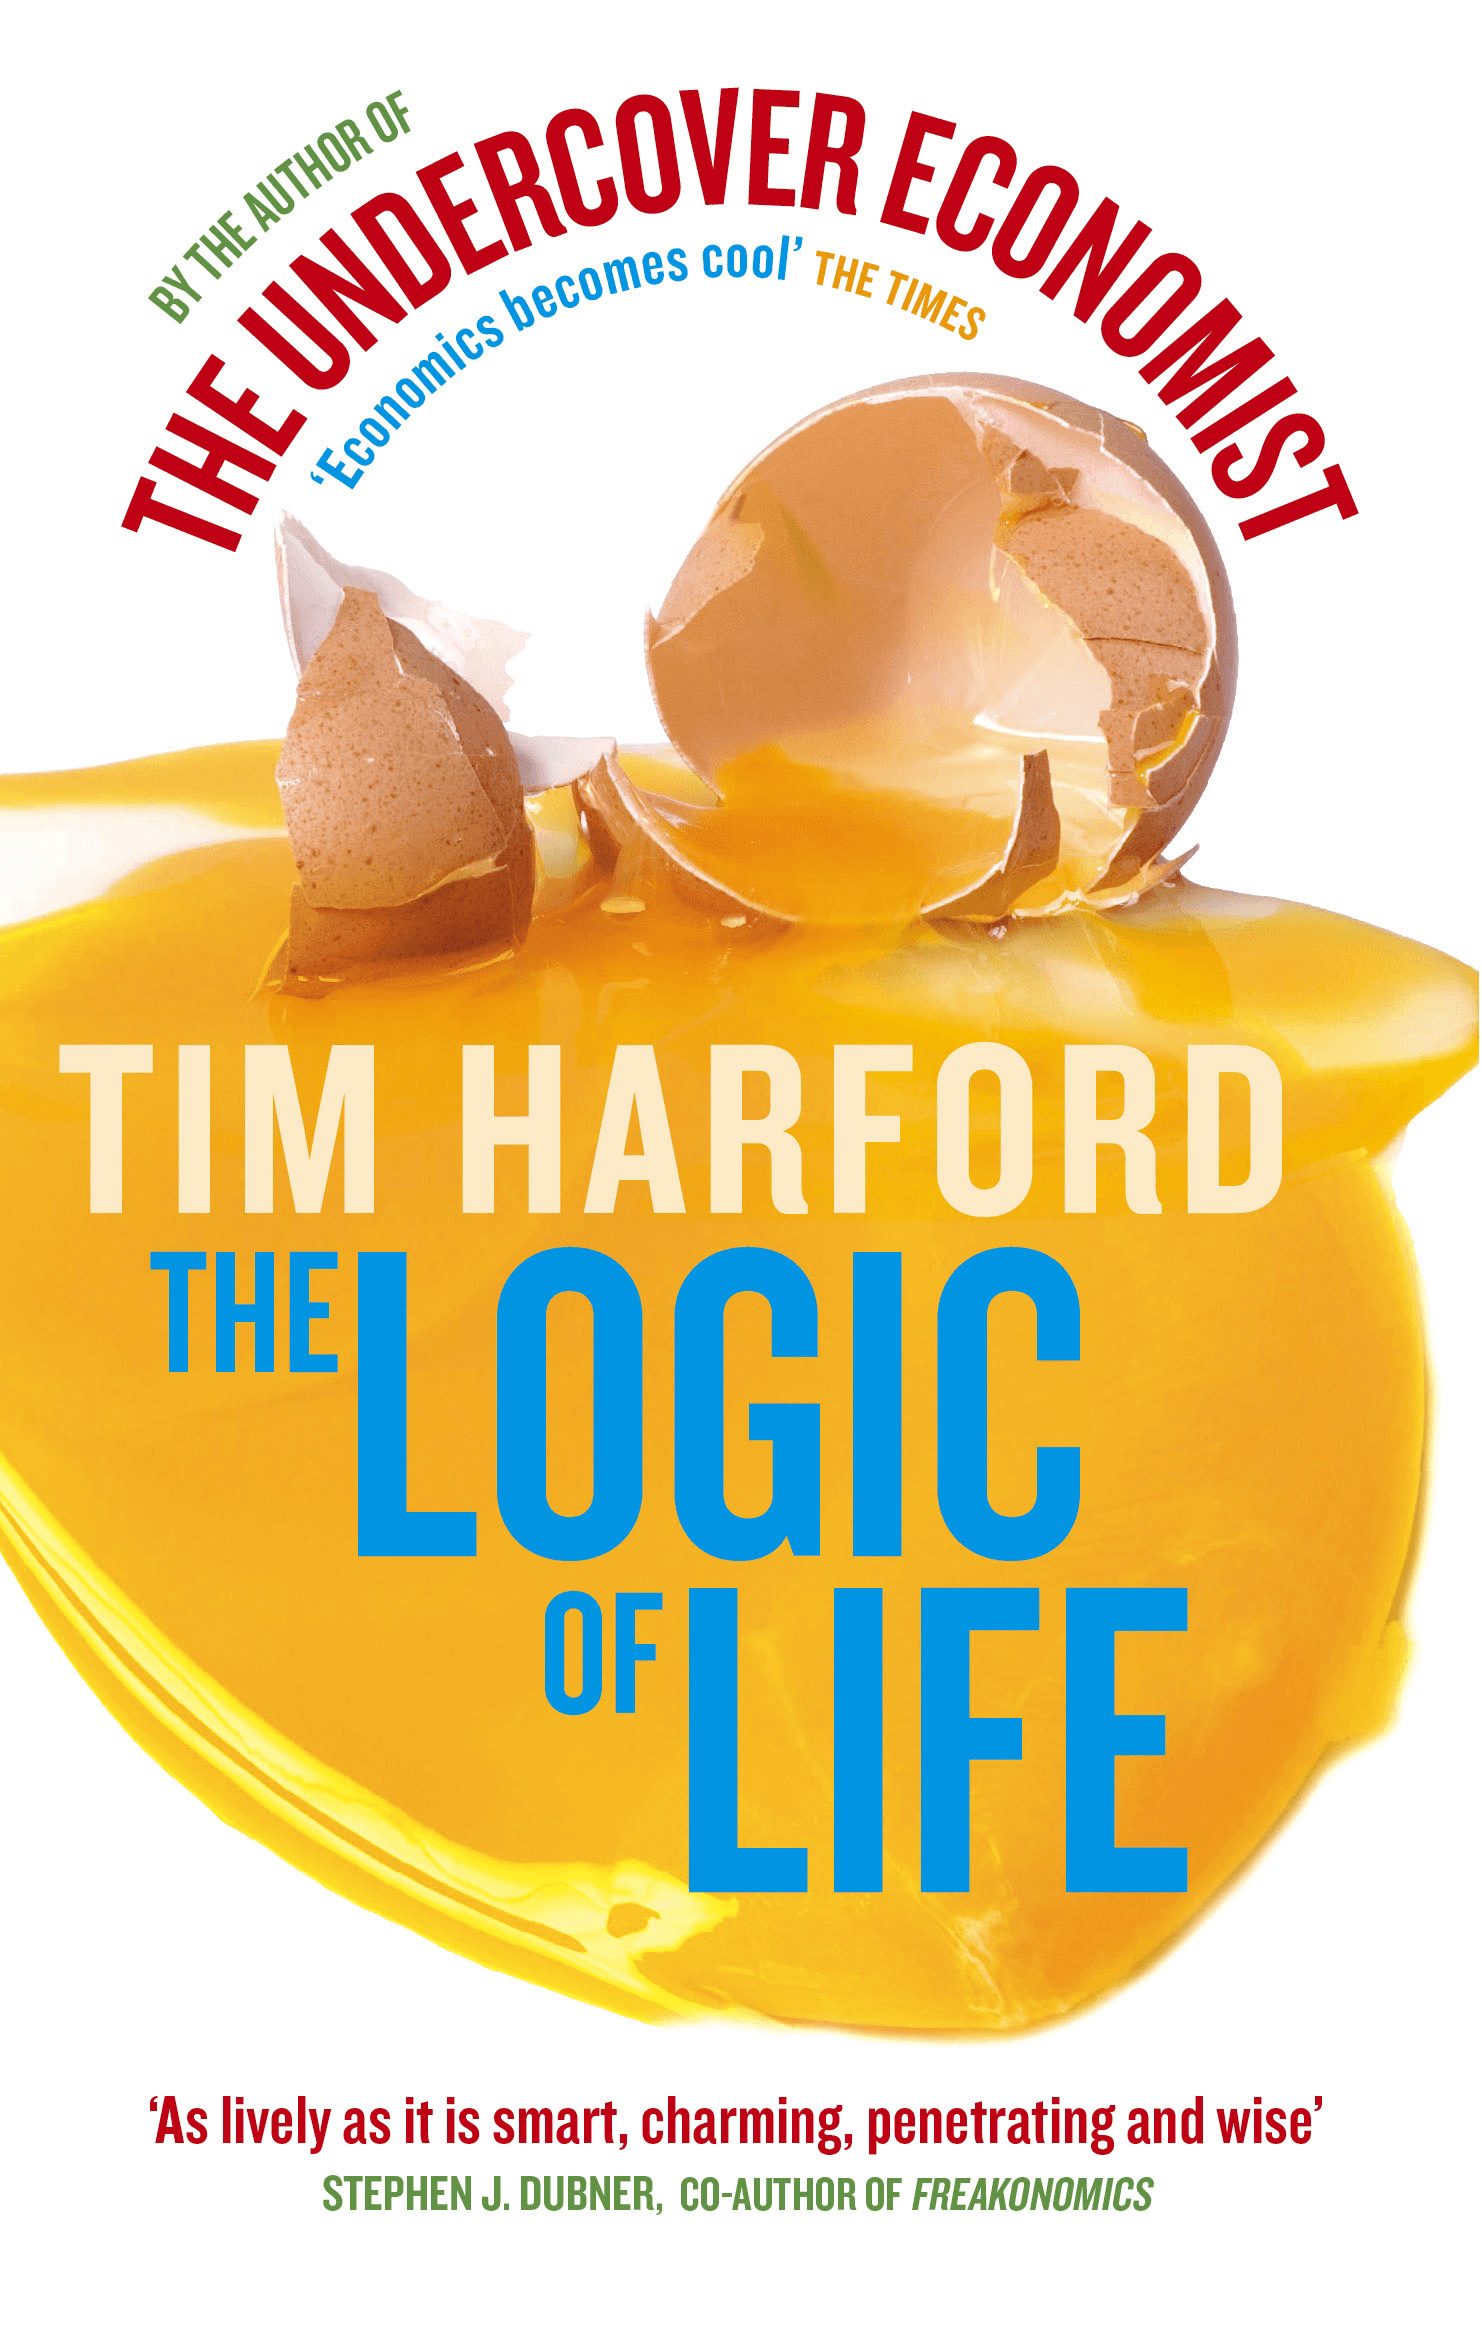 Book Cover: tim-harford--the-logic-of-life.png